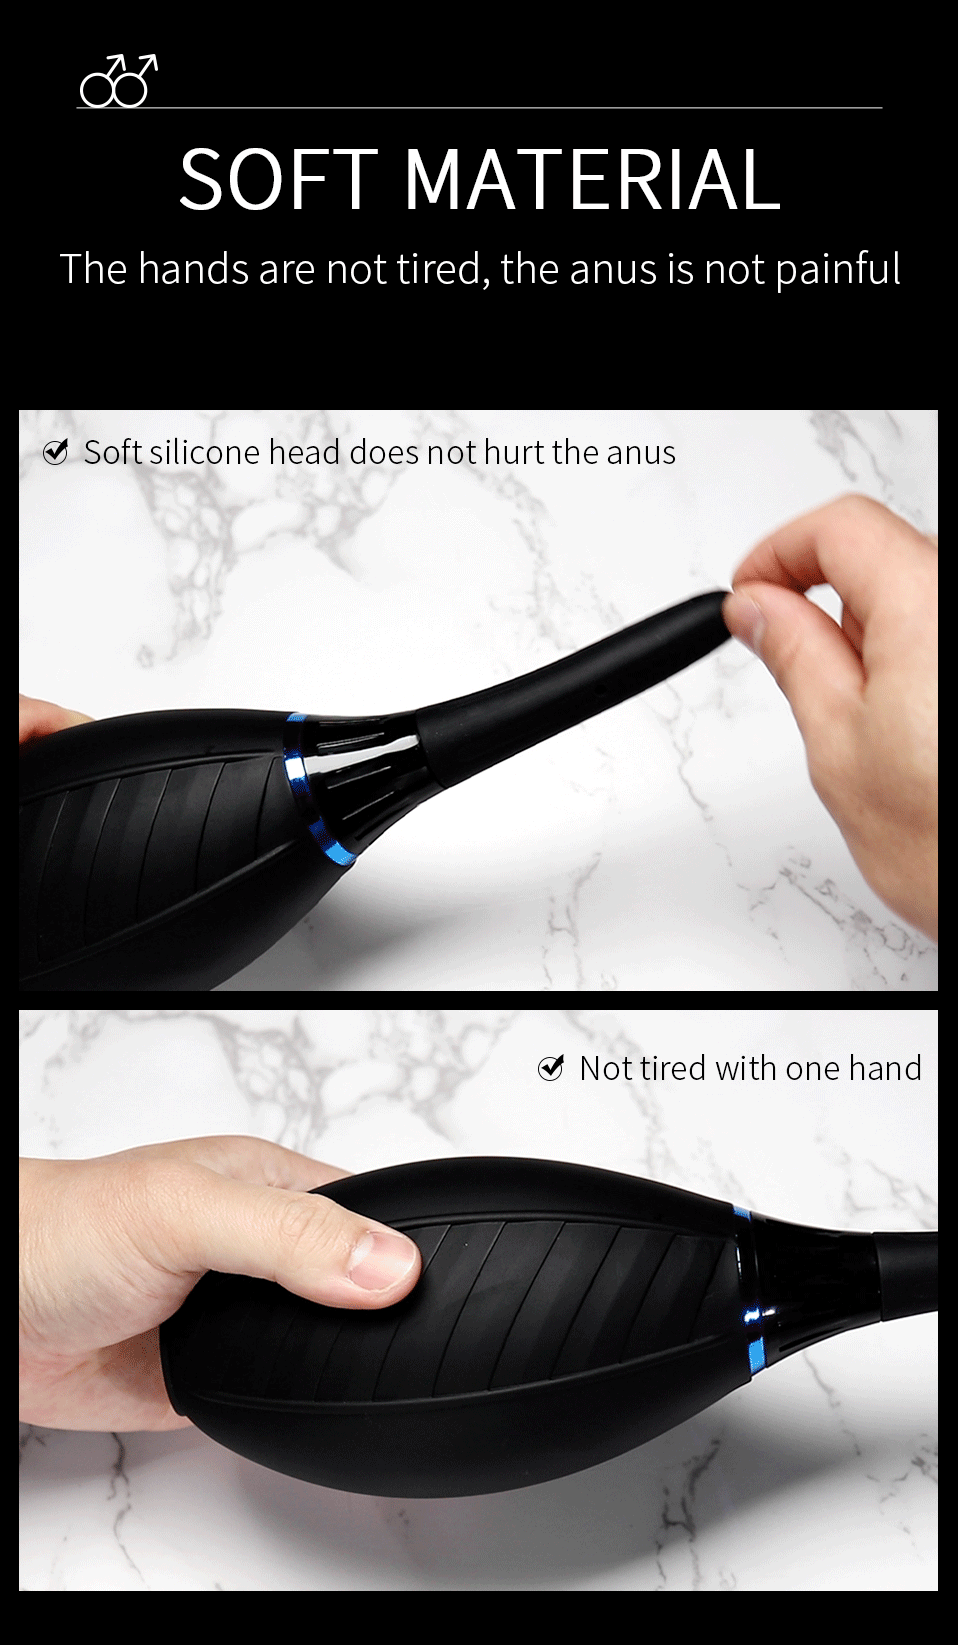 Black silicone anal douche for men and women. 8.7*1.7cm easy to insert without pain. Safe and comfortable anus-cleaning joy.